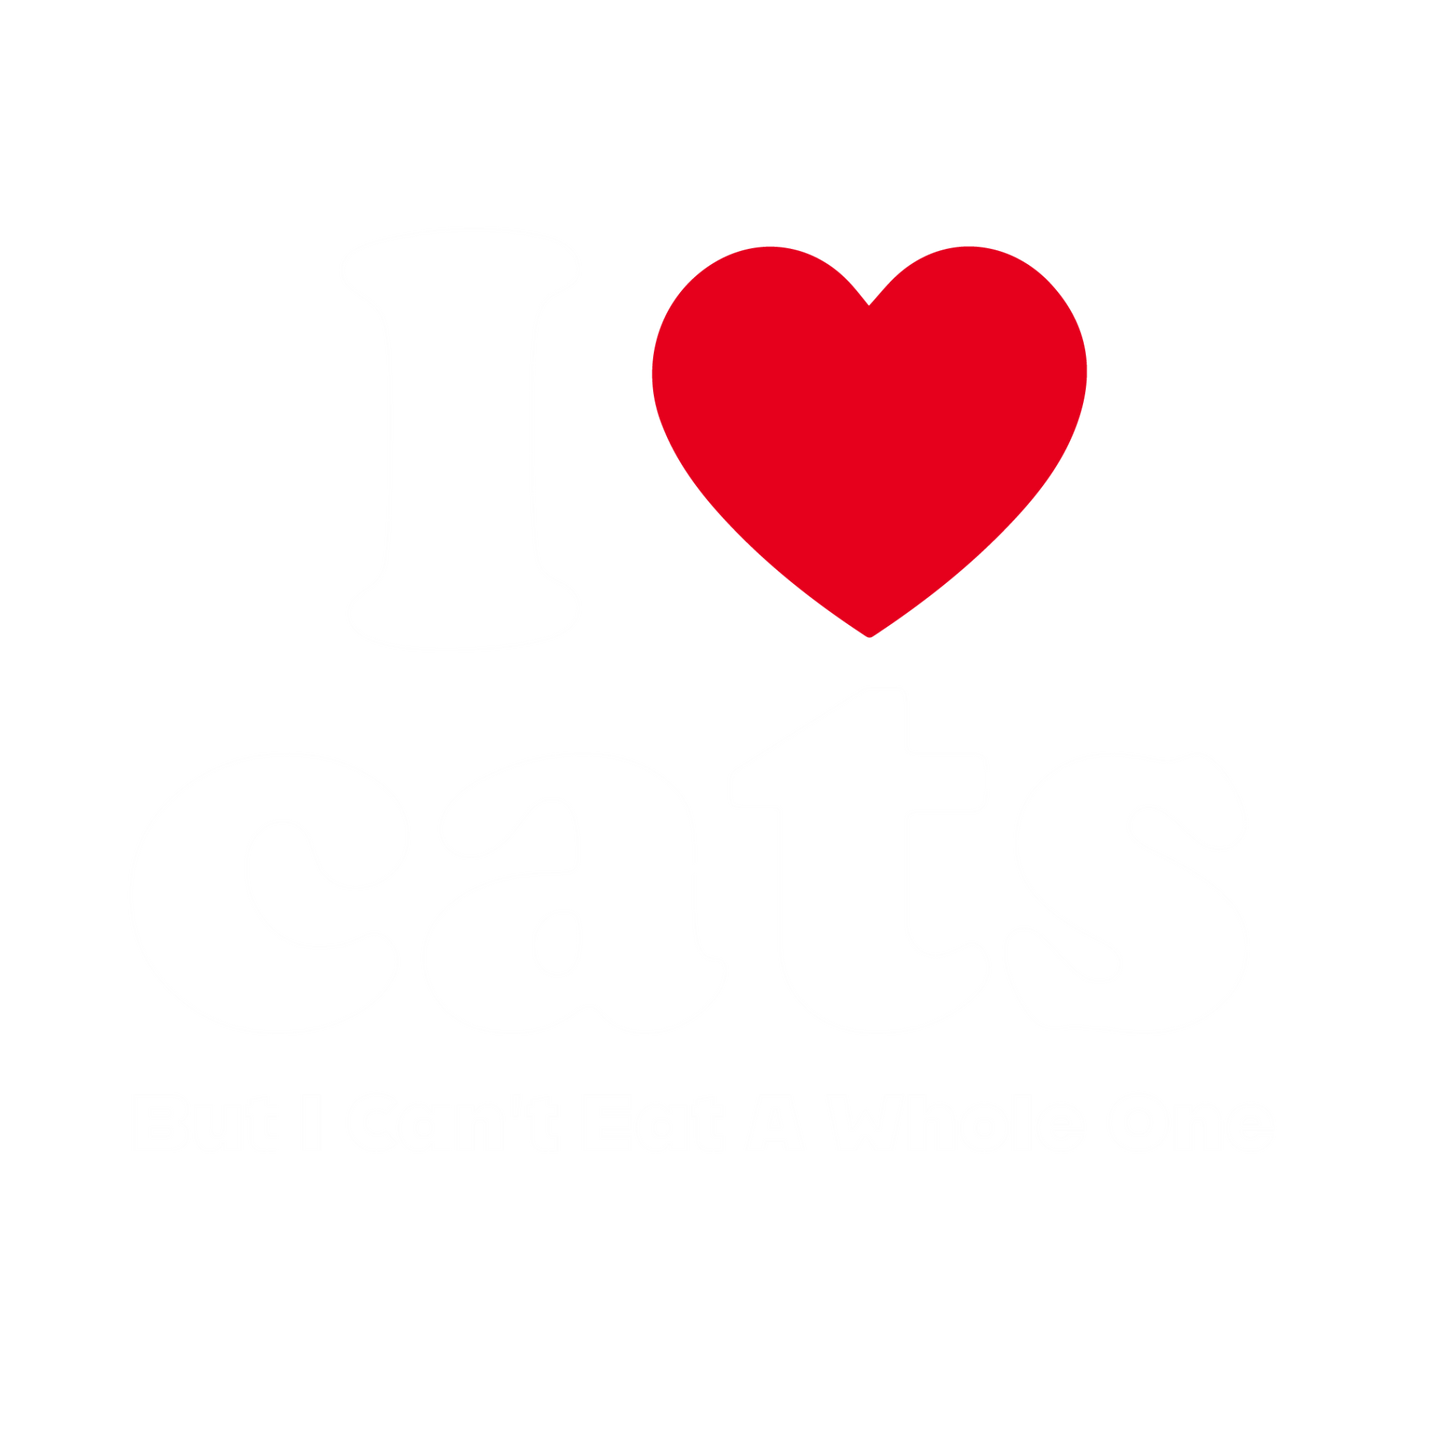 I Love Cats But I Can't Eat A Whole One, New